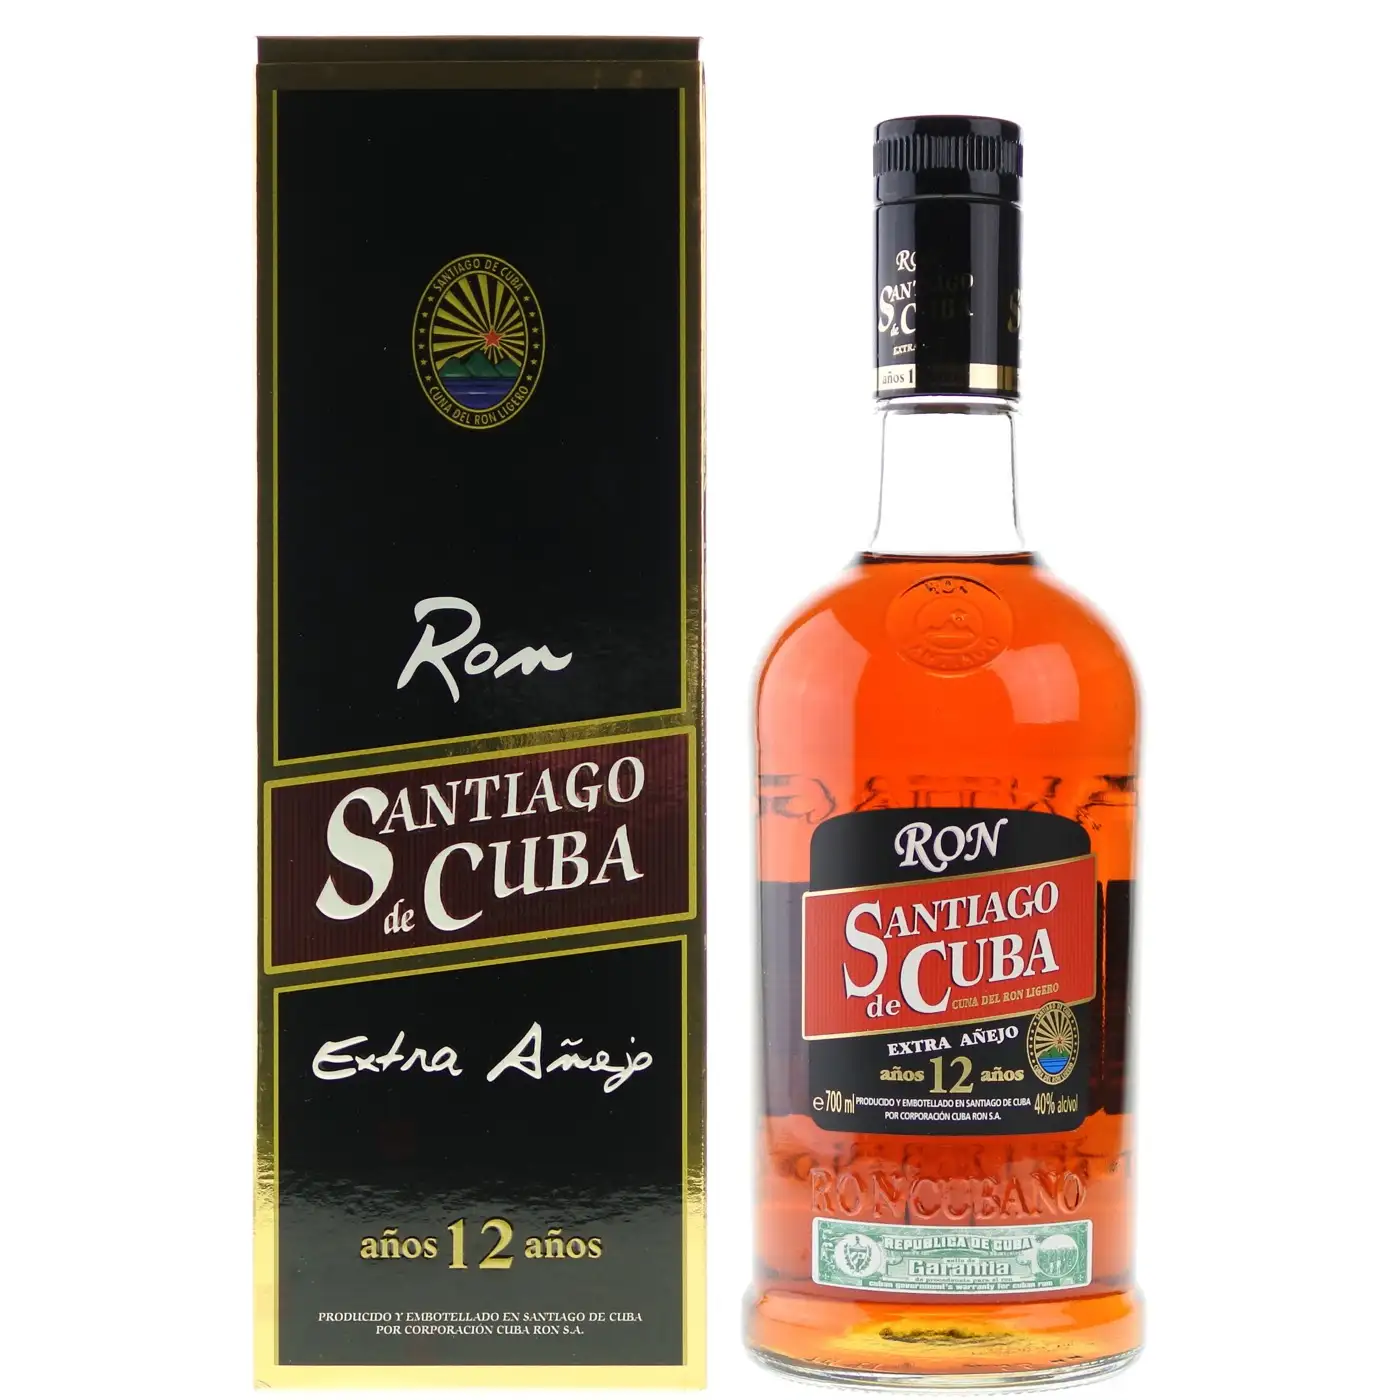 Image of the front of the bottle of the rum Extra Añejo 12 Años